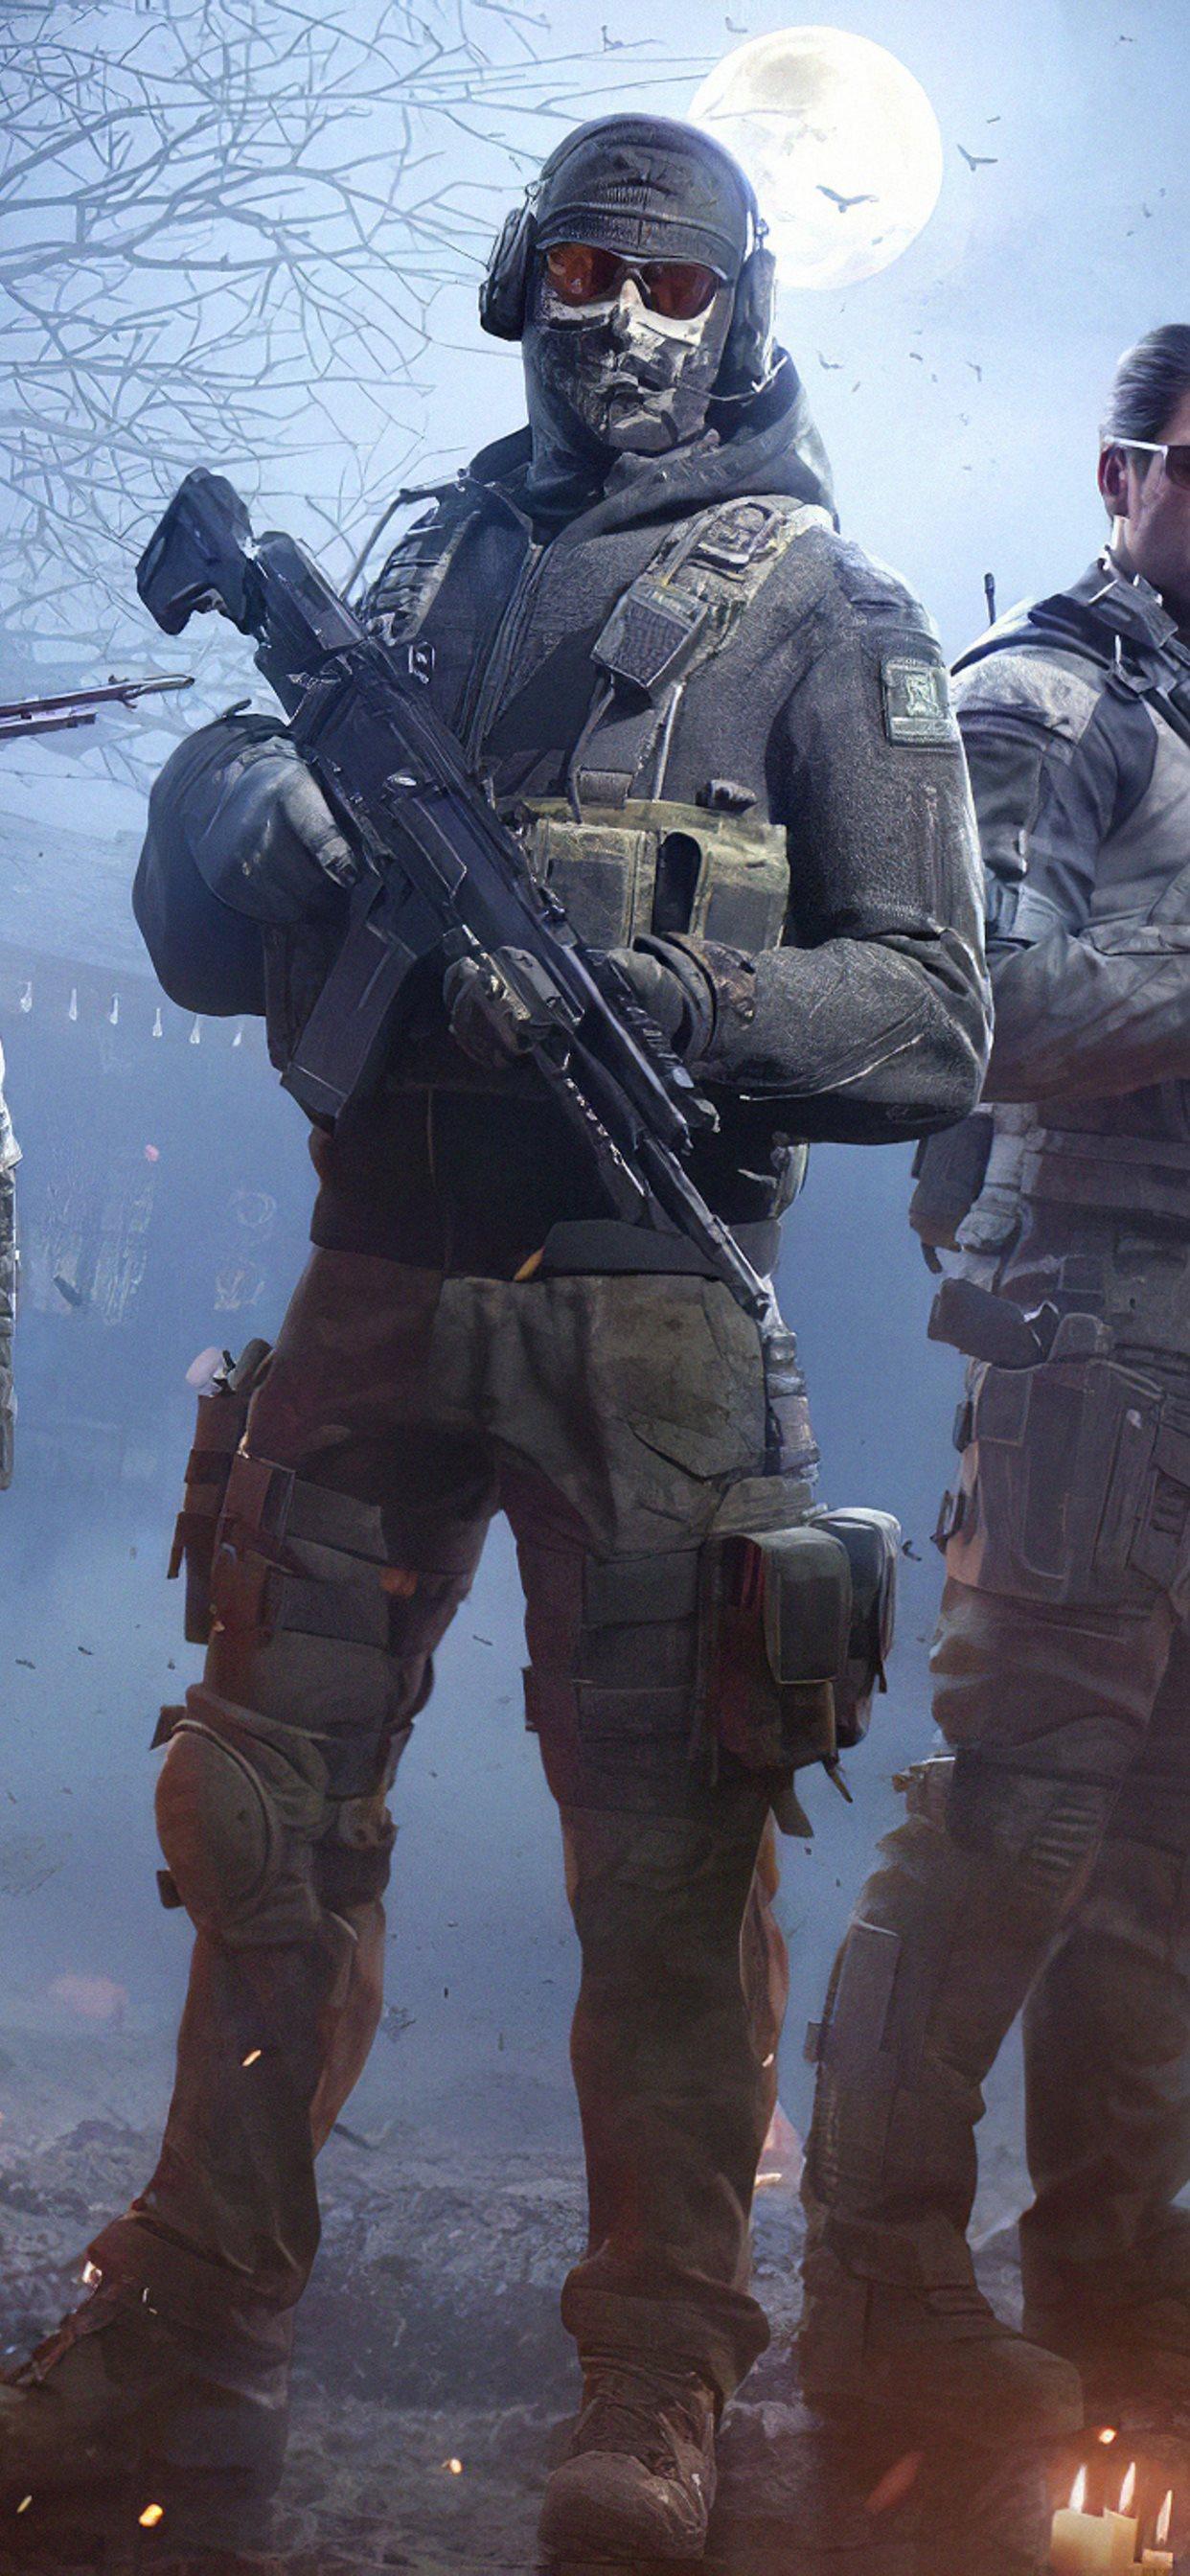 call of duty mobile 2019 game iPhone Wallpaper Free Download